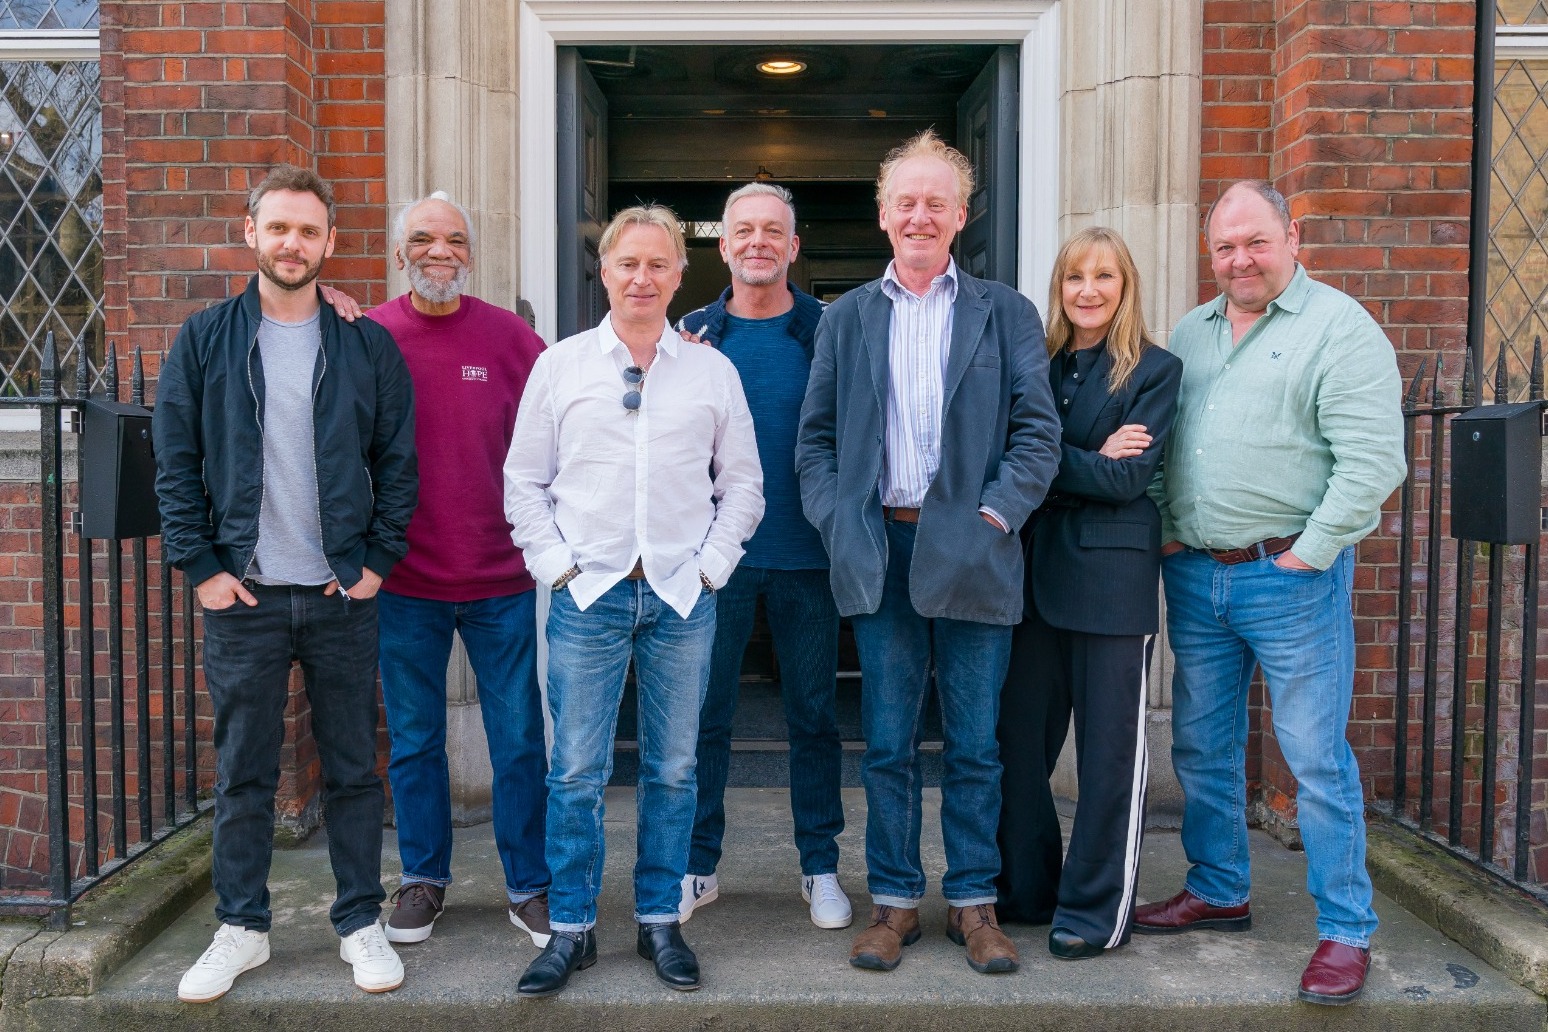 The Full Monty cast to reunite for new series